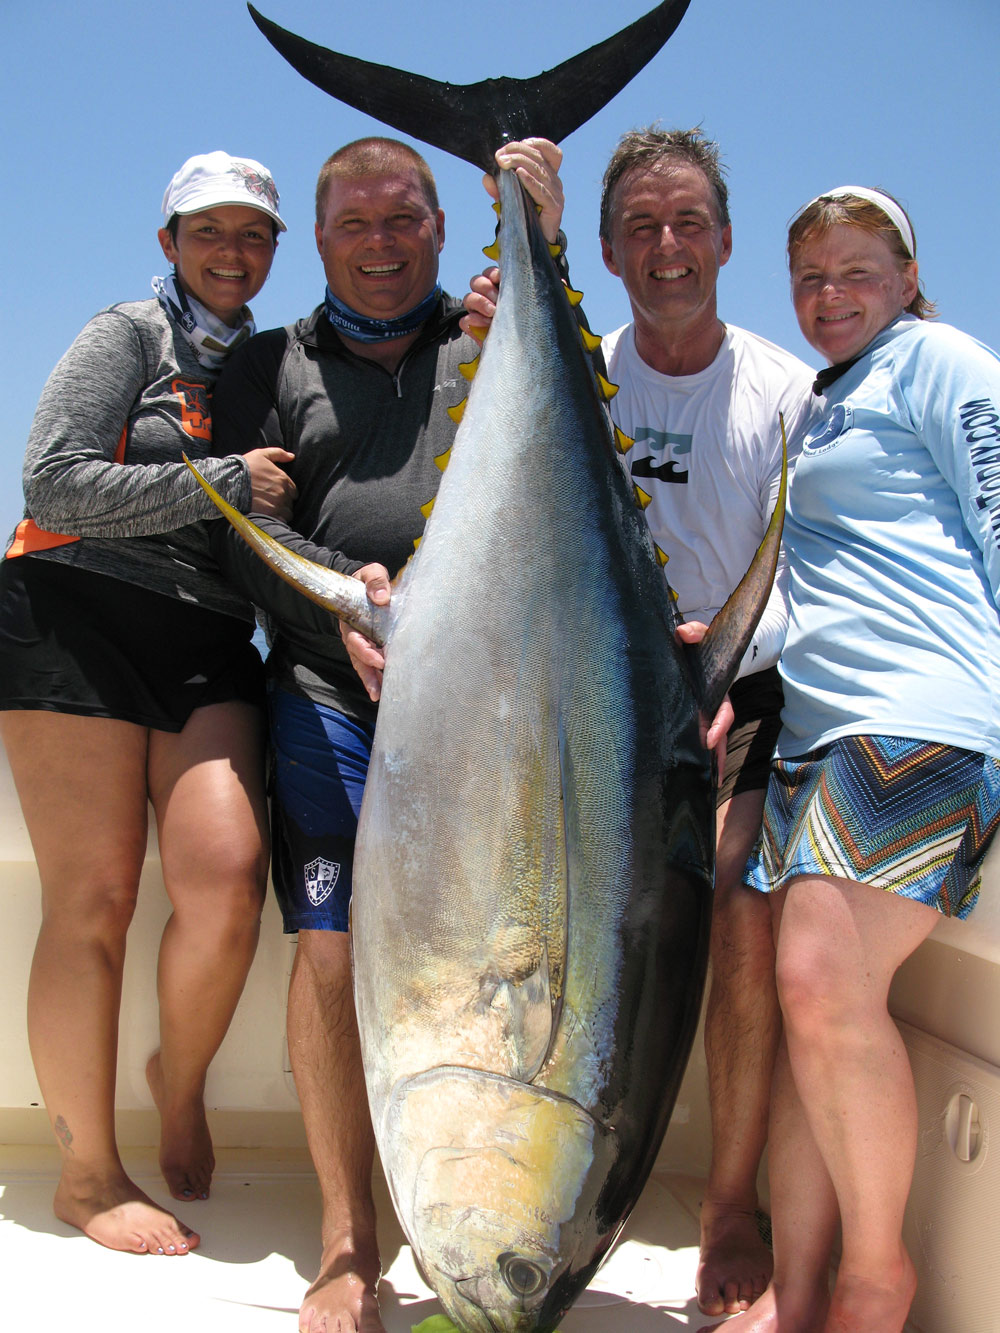 Monster tuna! L to R Doreen Booth, Nolan Booth, Mike Reimer, Jeanne Reimer.